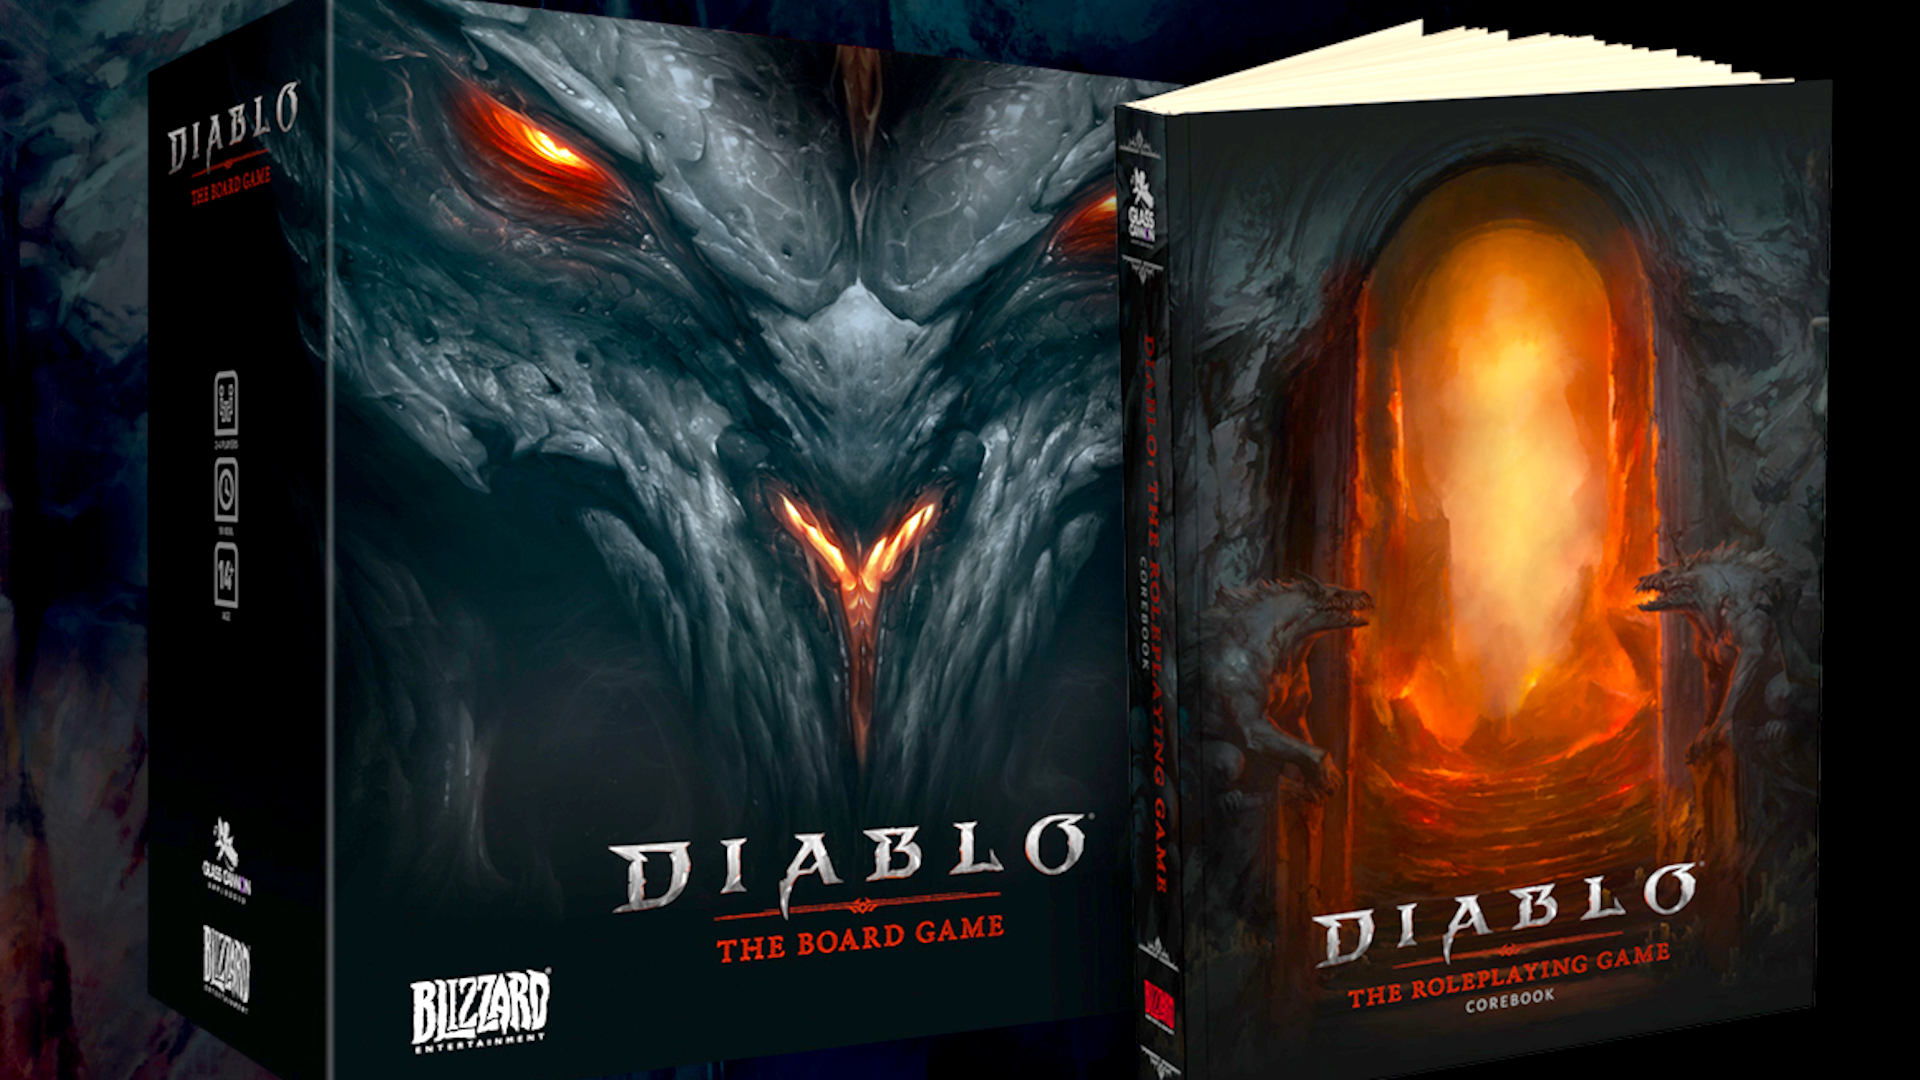 Finally, an official Diablo board game and TTRPG are coming!